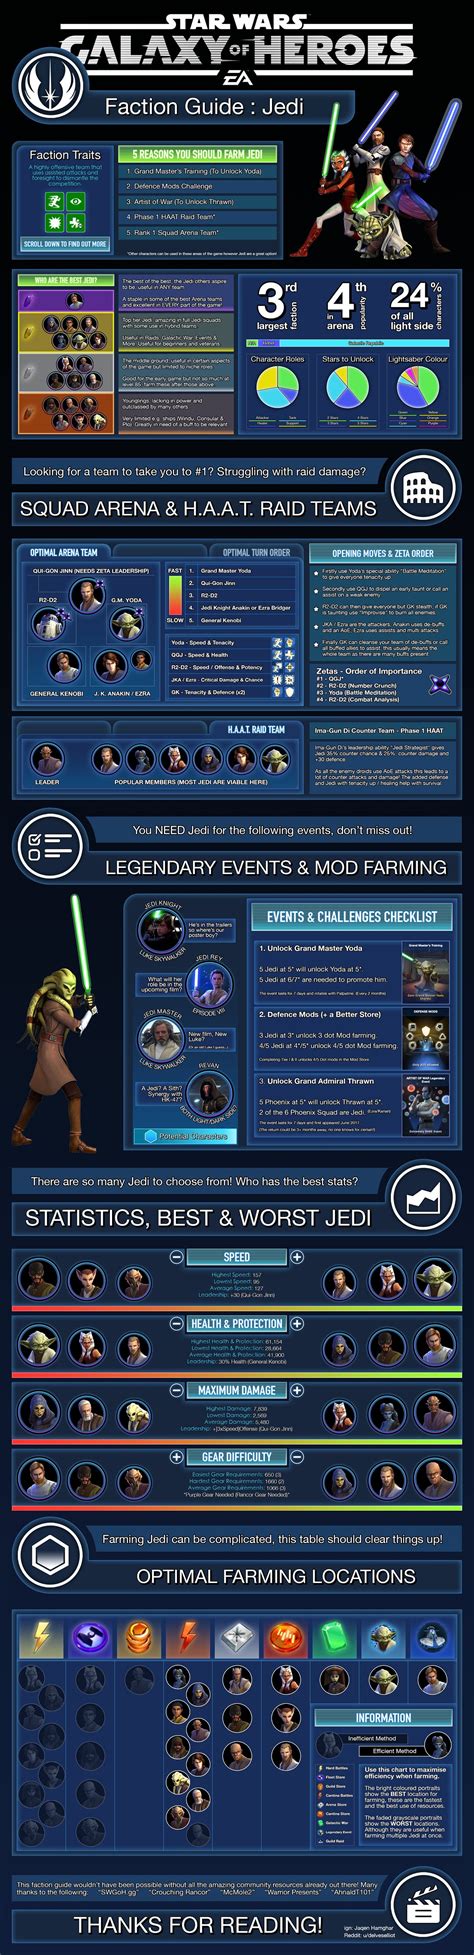 Faction Guide Jedi Infographic Swgalaxyofheroes